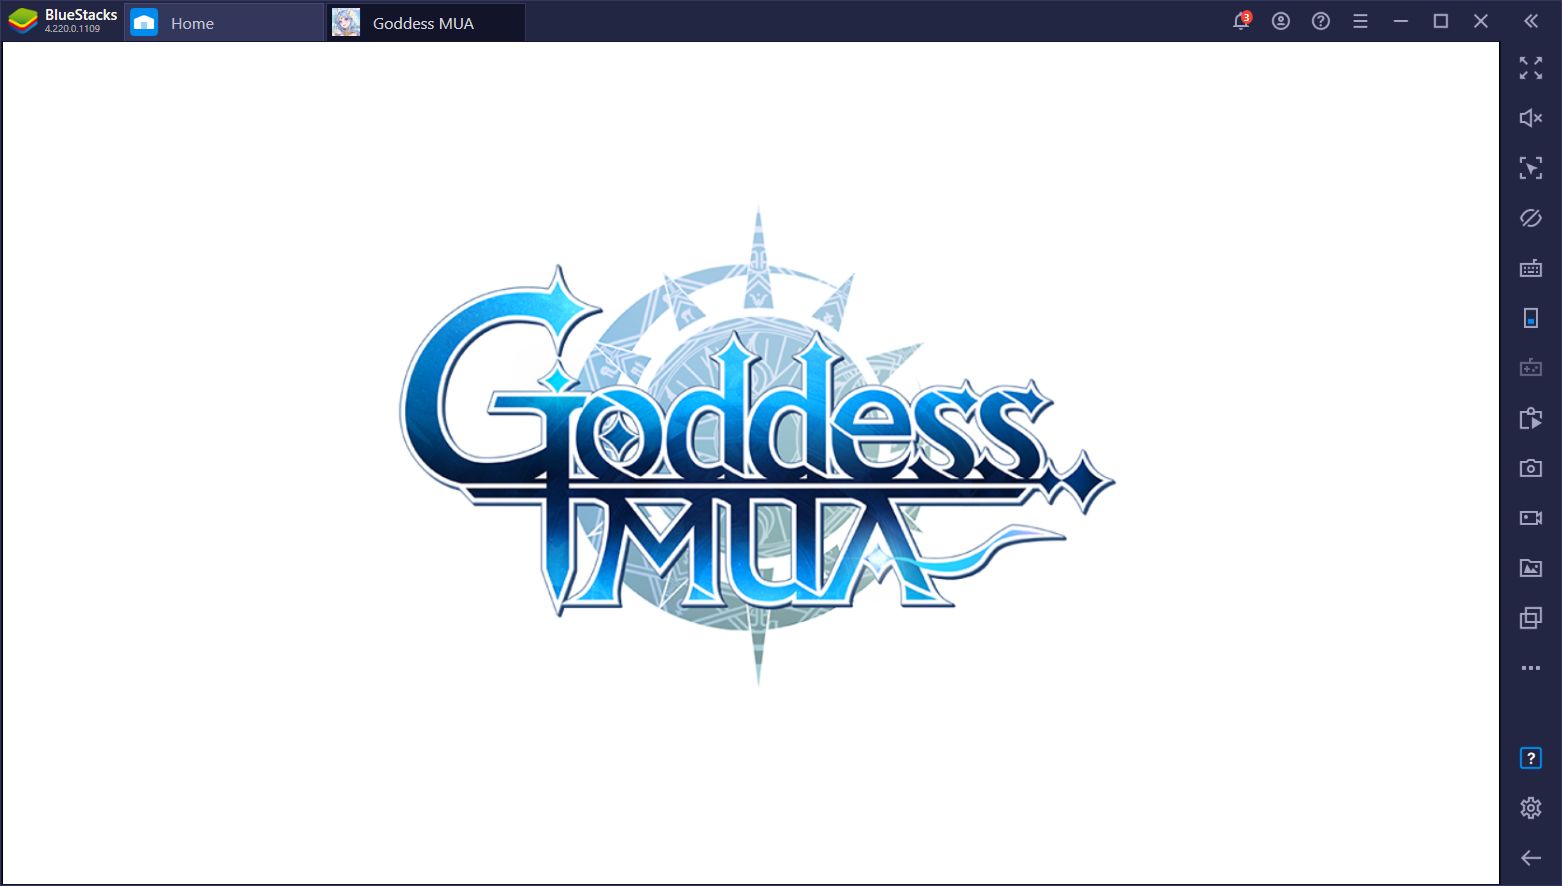 Goddess MUA on PC - Dive Into the Hottest New Mobile MMORPG on PC With BlueStacks